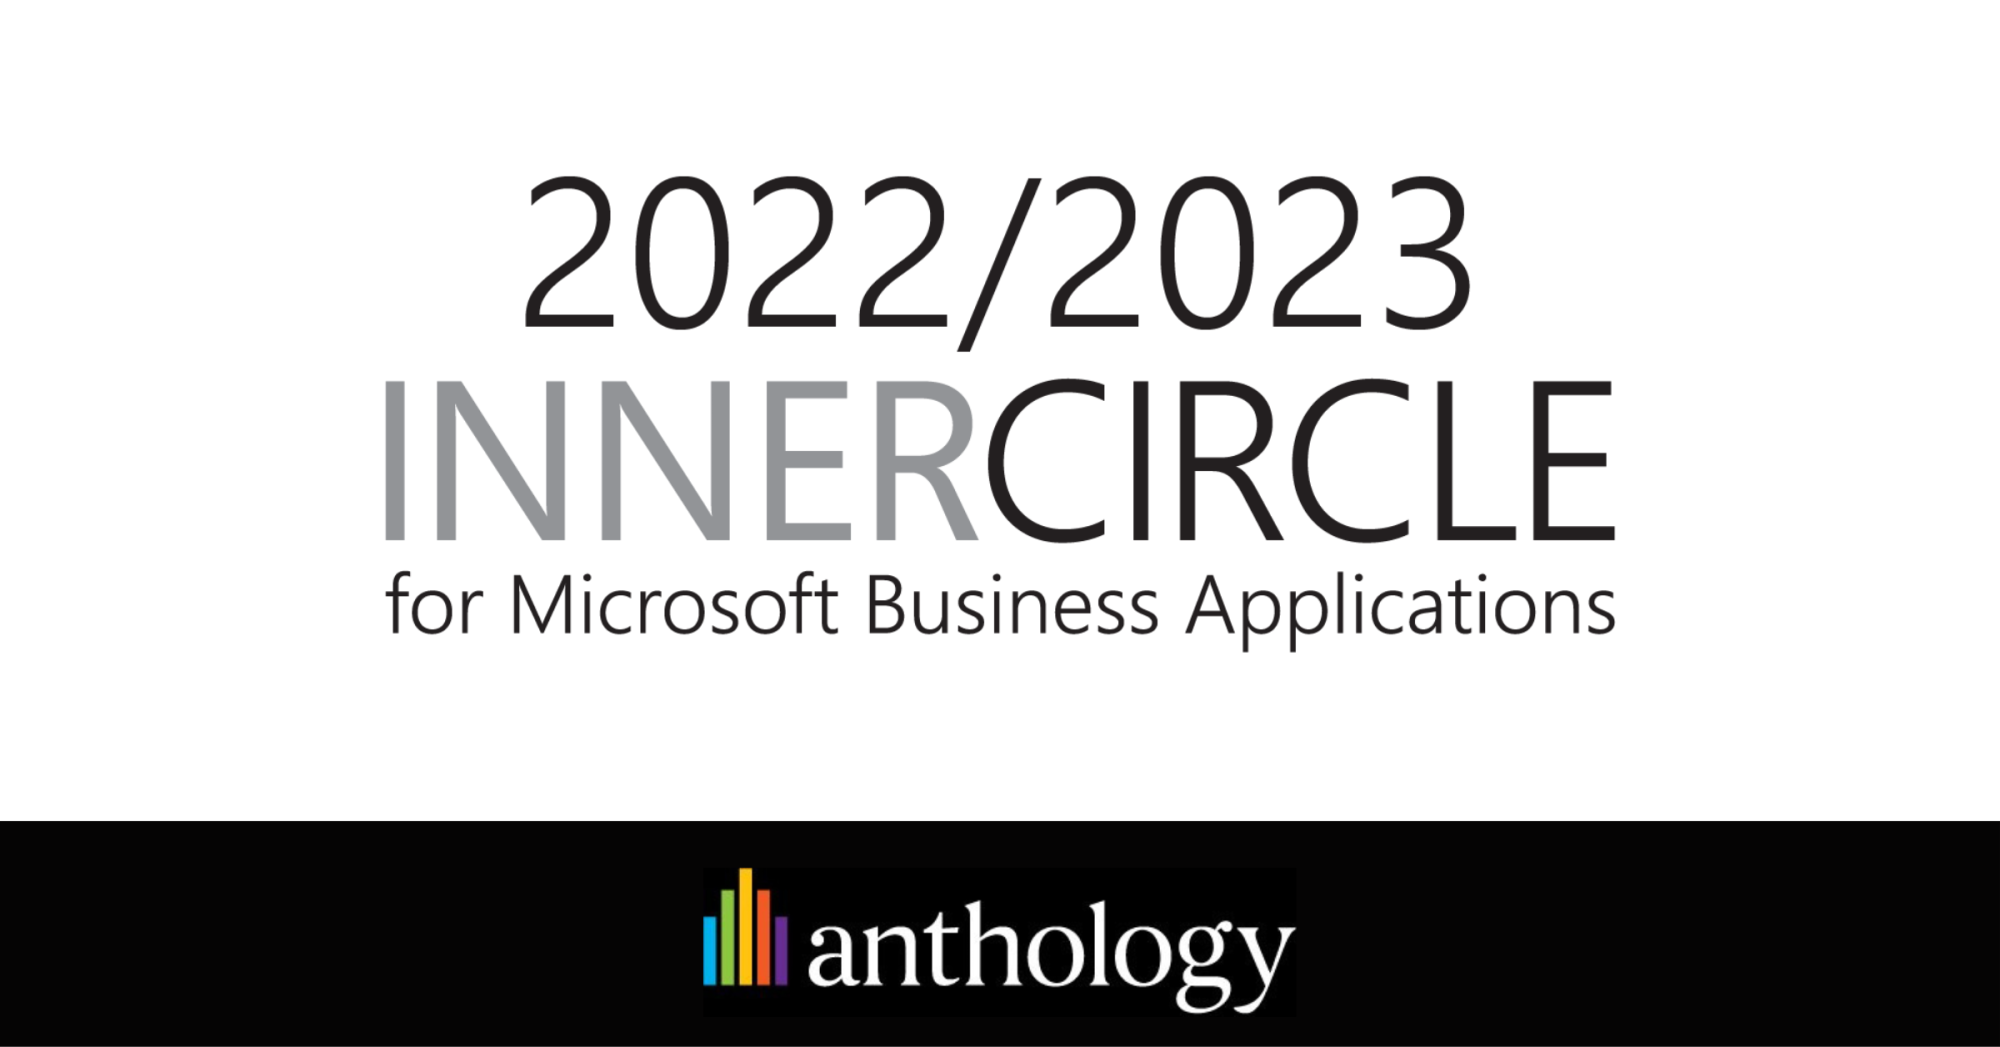 2022/2023 inner circle for Microsoft Business Applications logo locked up with Anthology logo